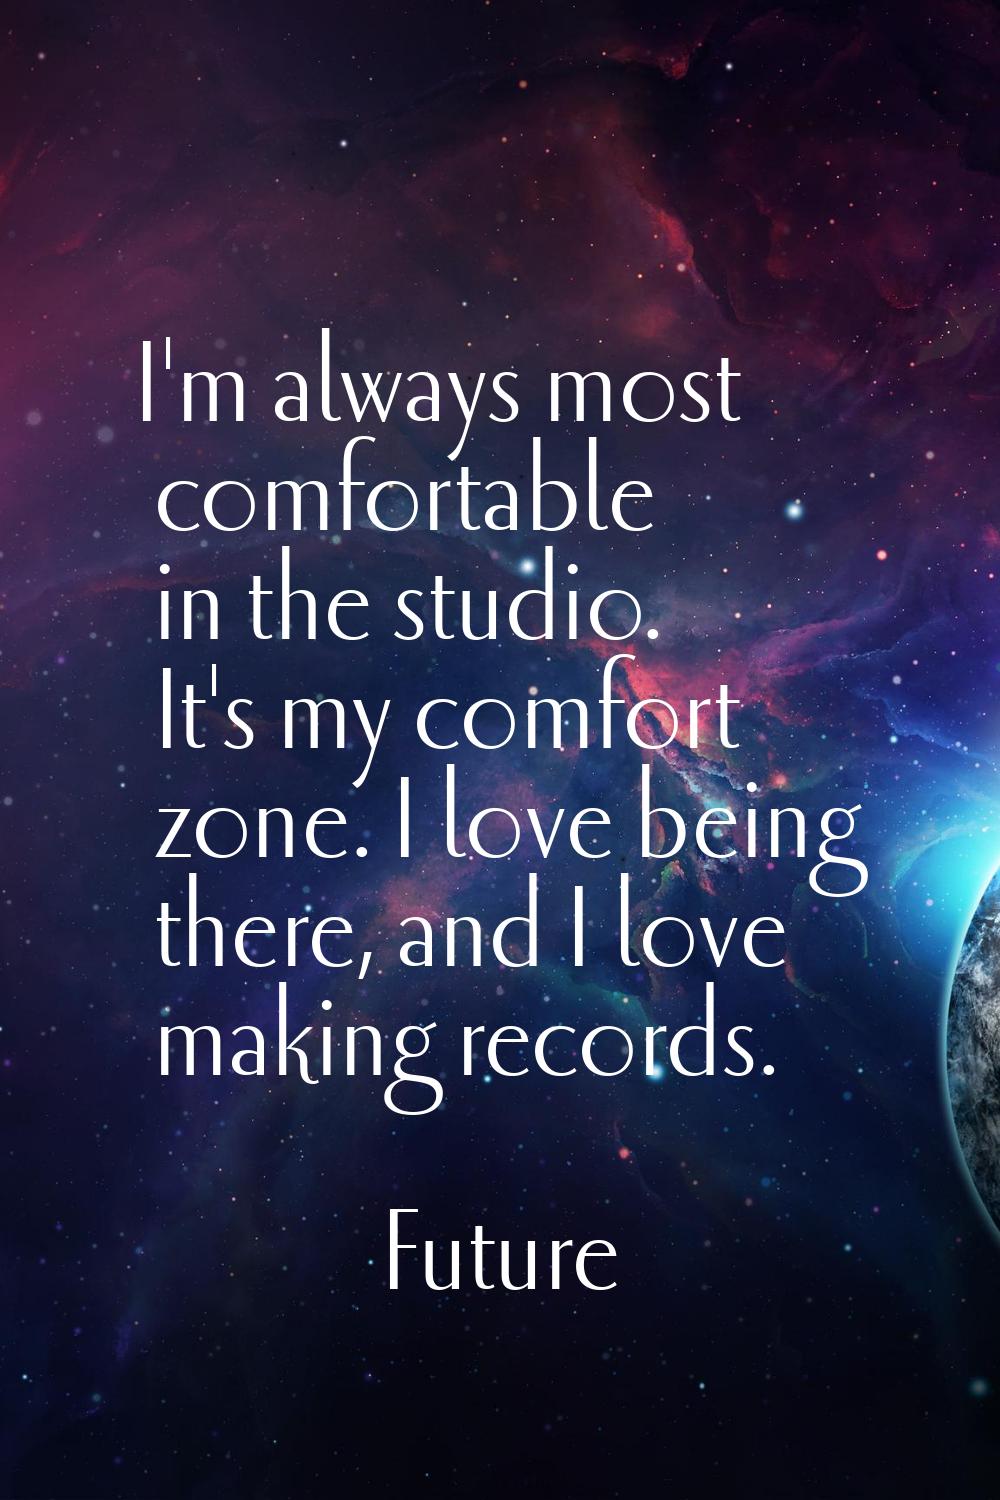 I'm always most comfortable in the studio. It's my comfort zone. I love being there, and I love mak